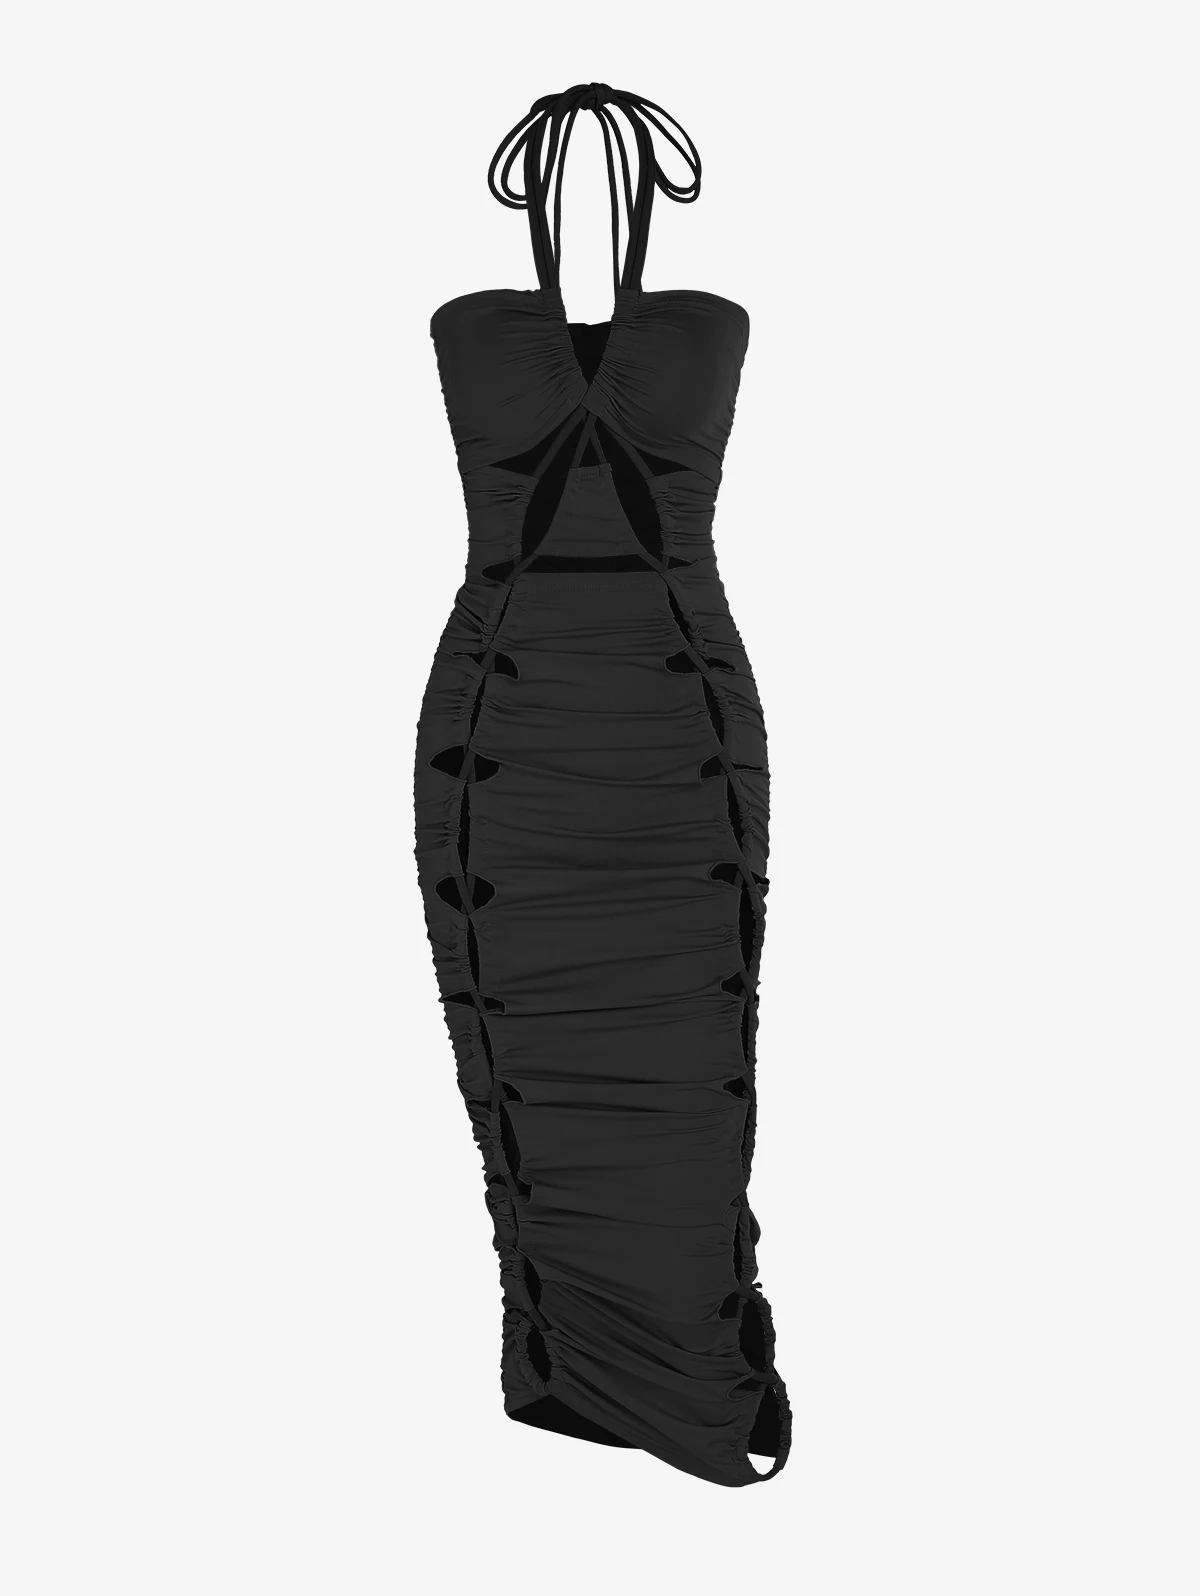 

ZAFUL Lace Up Criss Cross Halter Cut Out Slinky Dress Women Sleeveless Bodycon Midi Dress Party Club Night Out Outfits